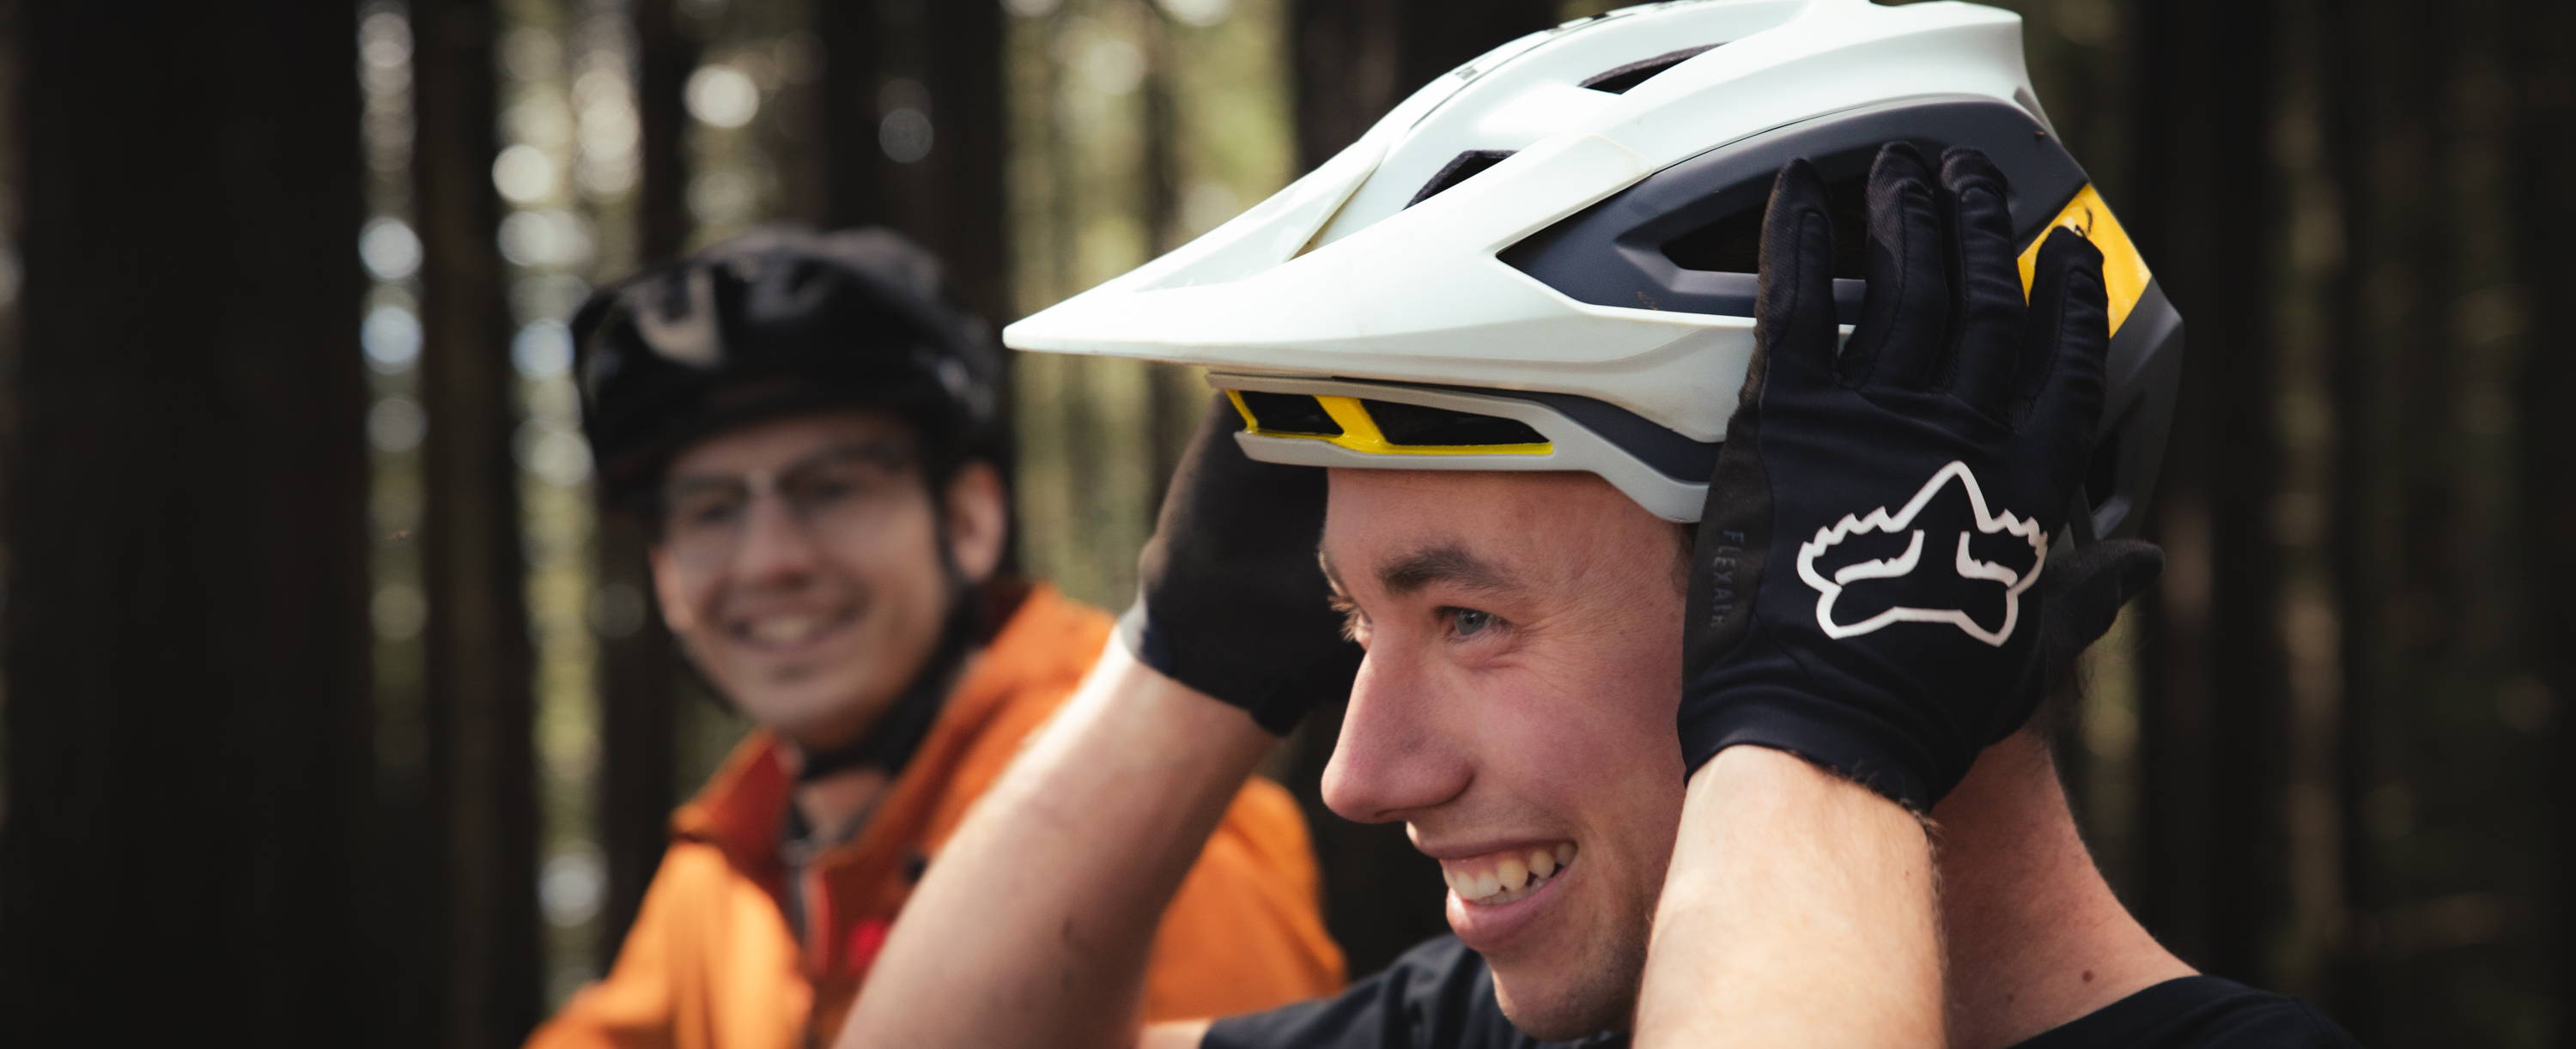 Tor wearing the Fox SpeedFrame Pro mountain bike helmet in the blocked colorway and smiling because he loves his new helmet so much